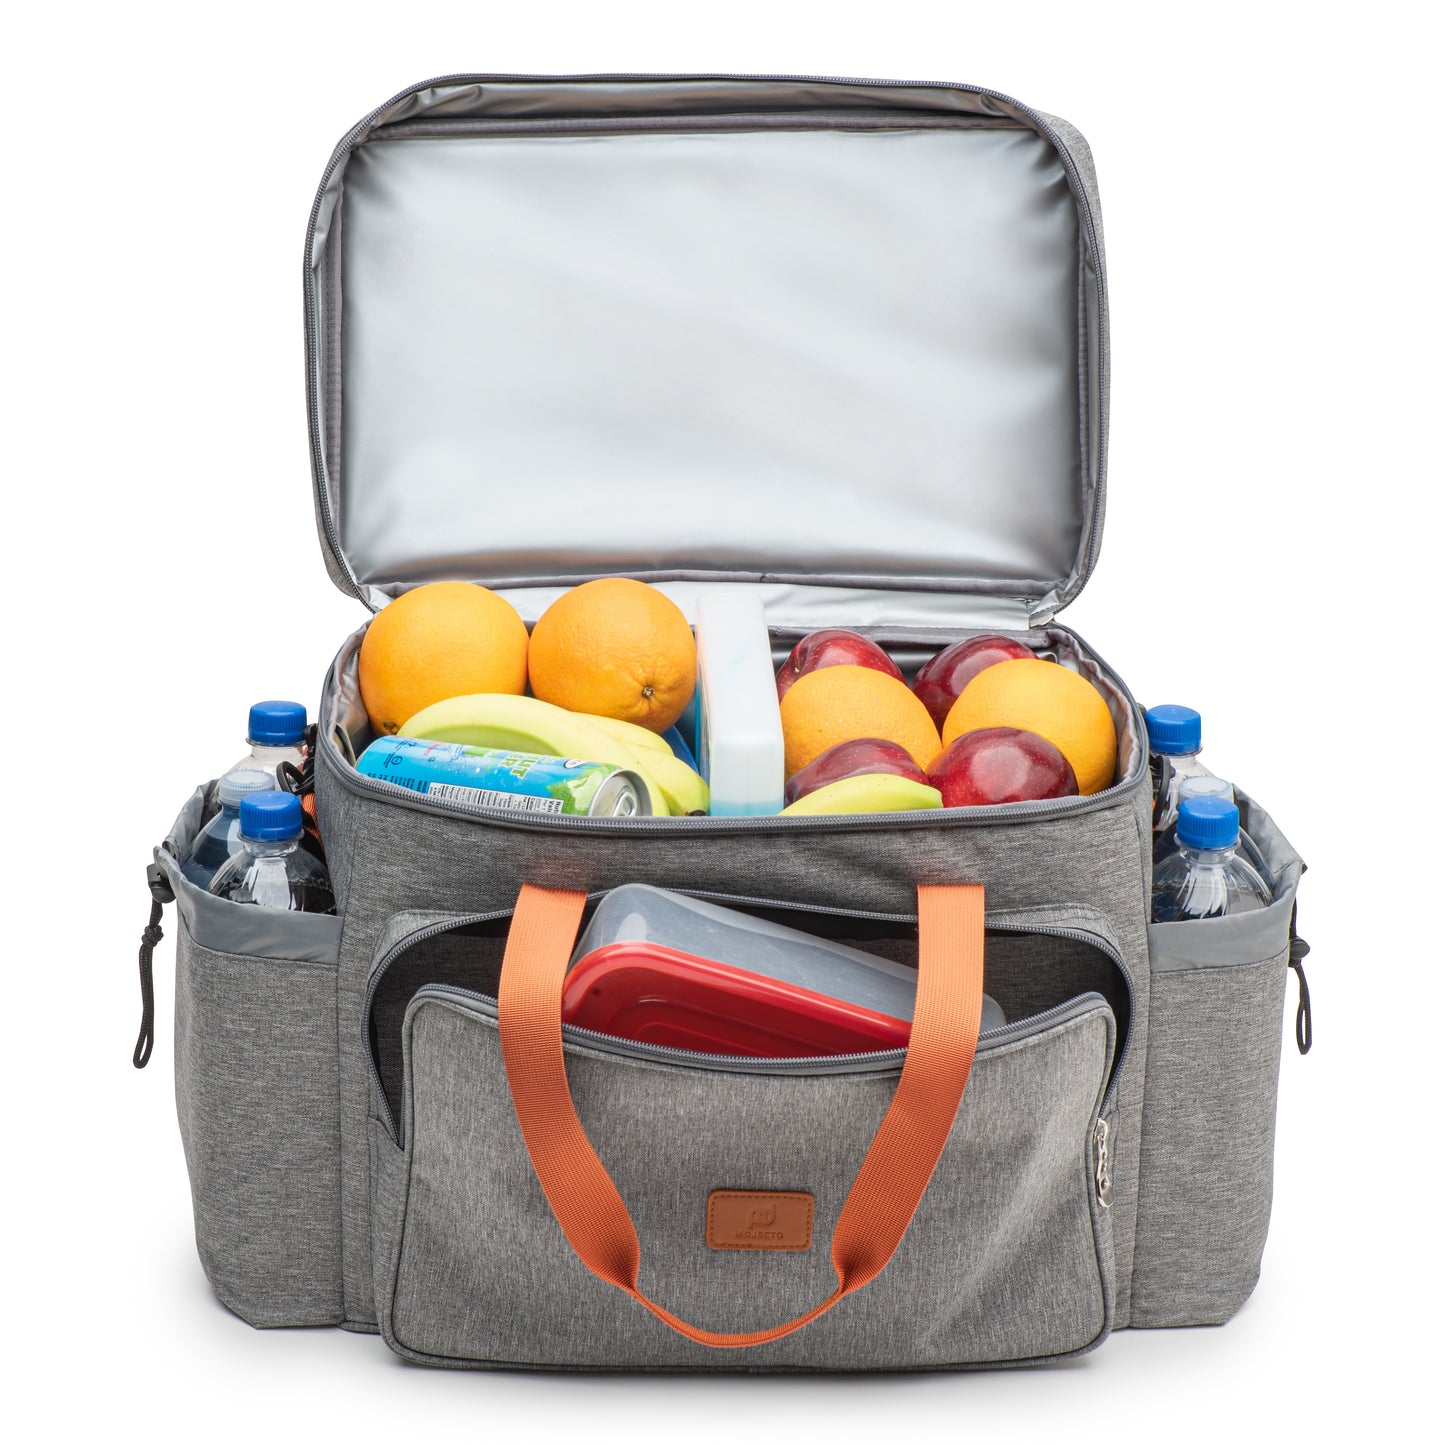 XX-Large Cooler Bag with Hard Bottom (16x13x10 in). Heavy Duty Fabric, Thick Foam Insulation, Heat Sealed Liner.